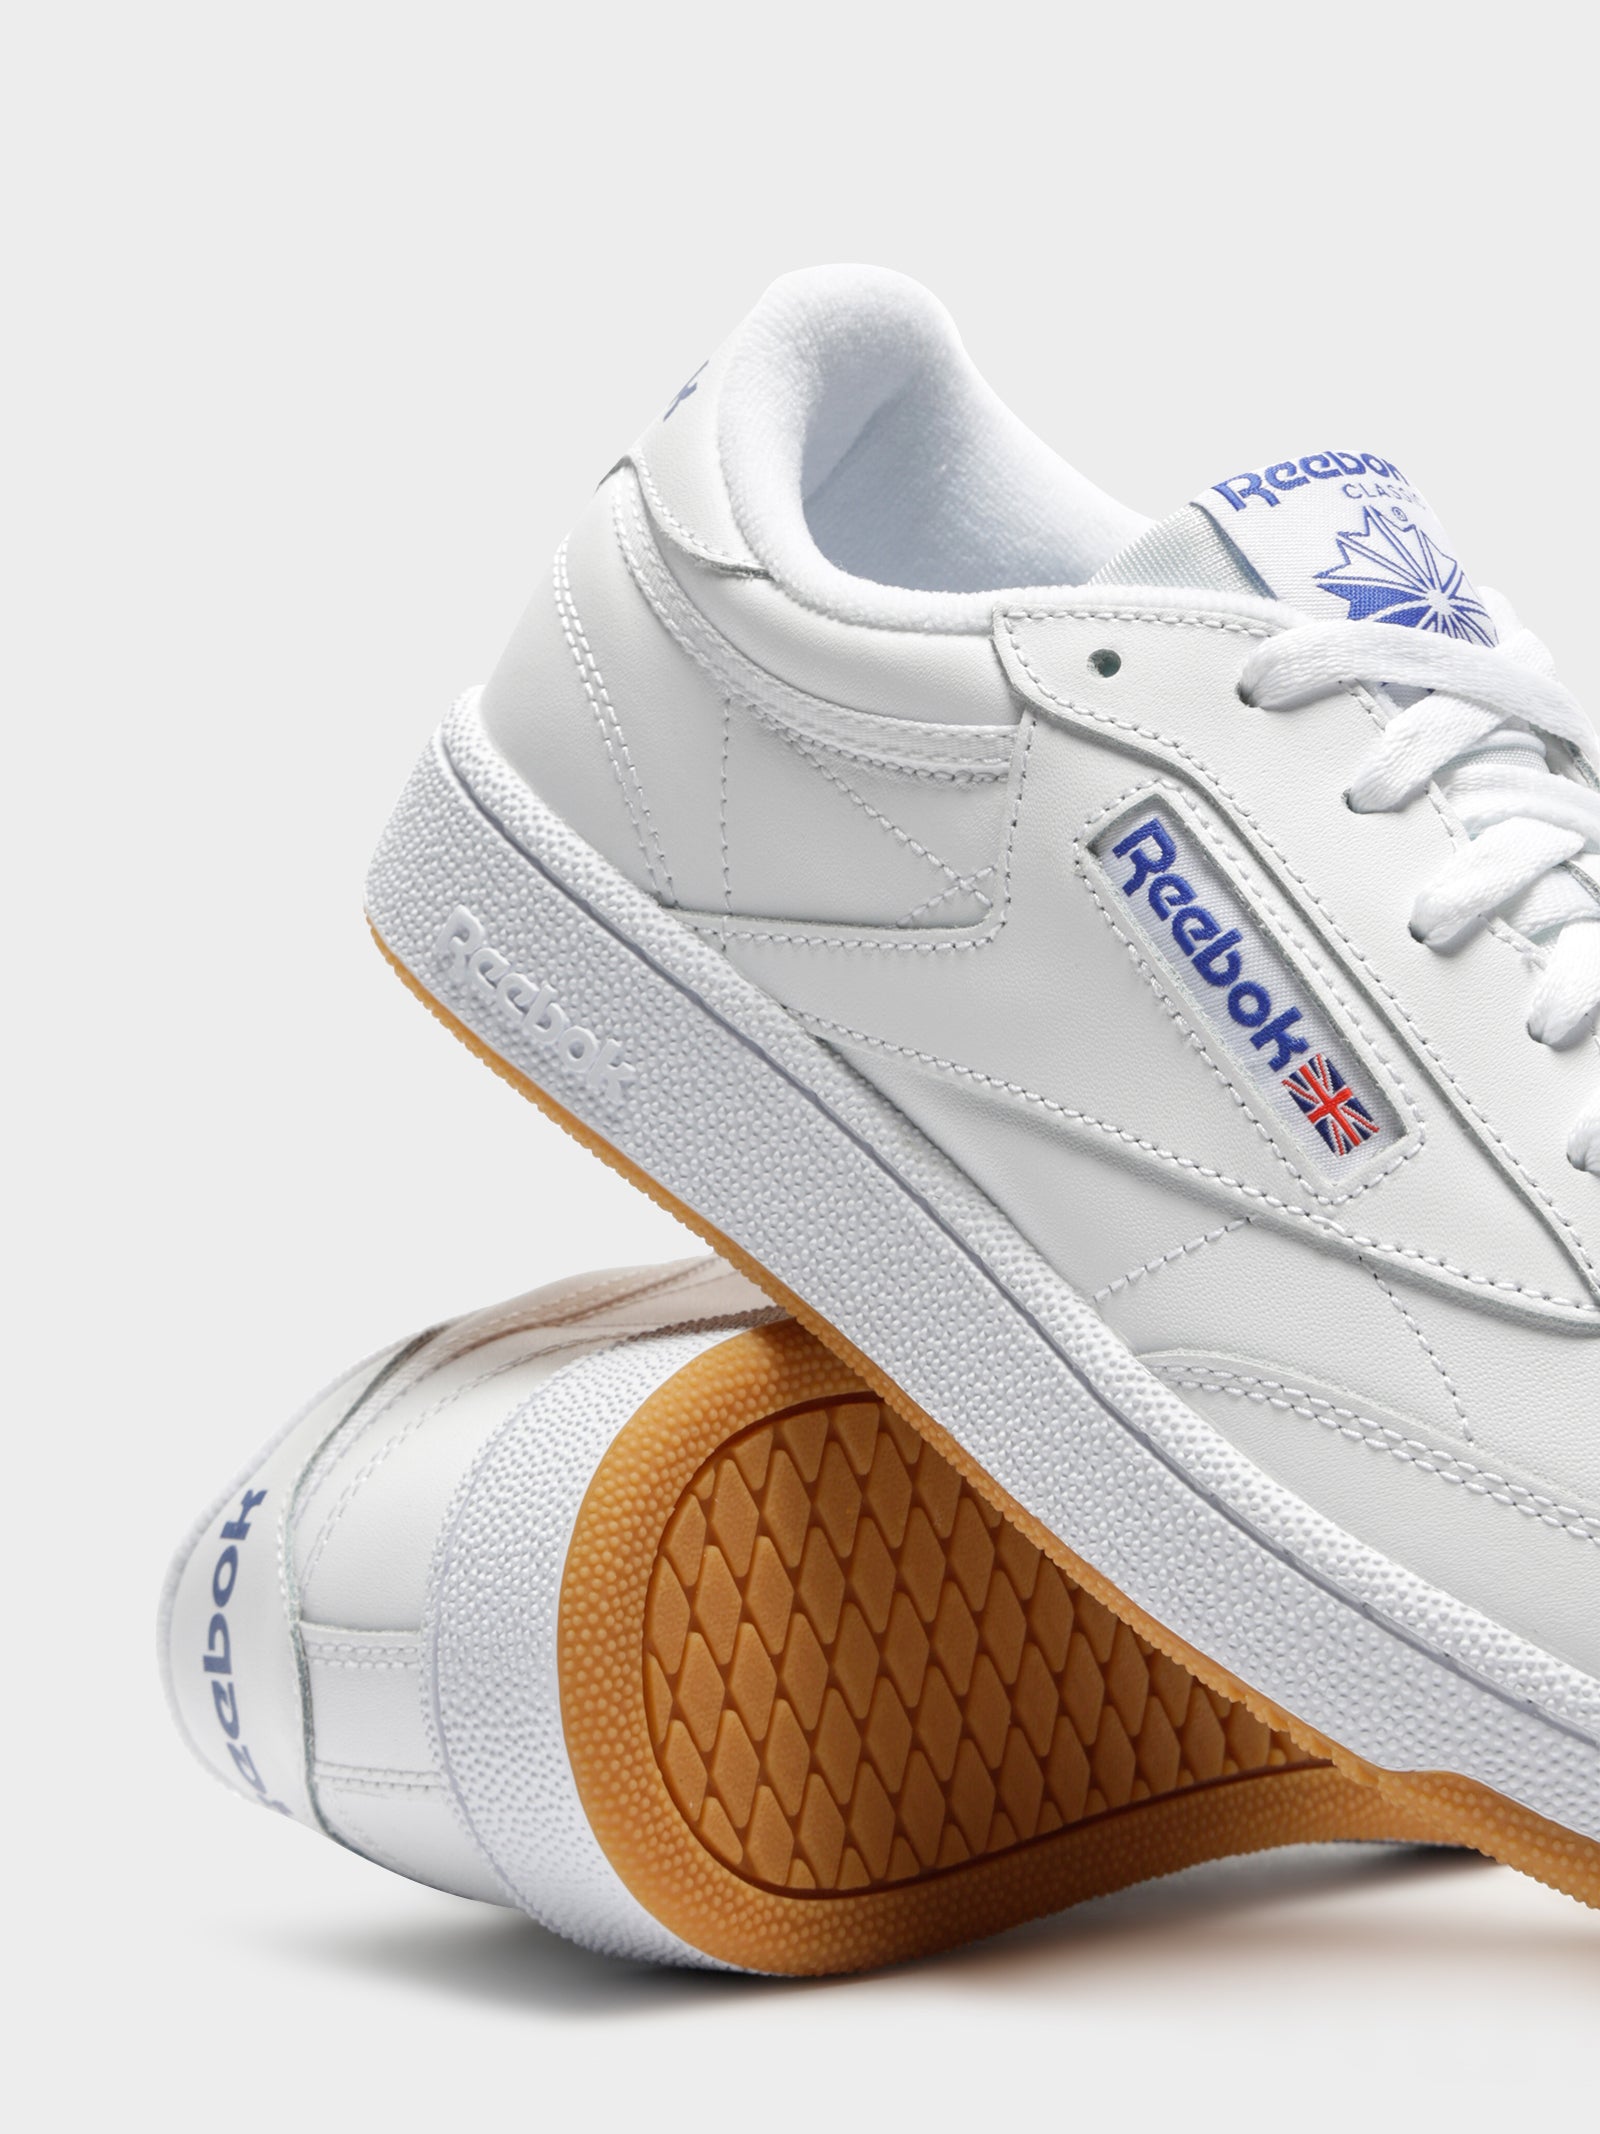 Unisex Club C 85 Sneakers in White & Blue